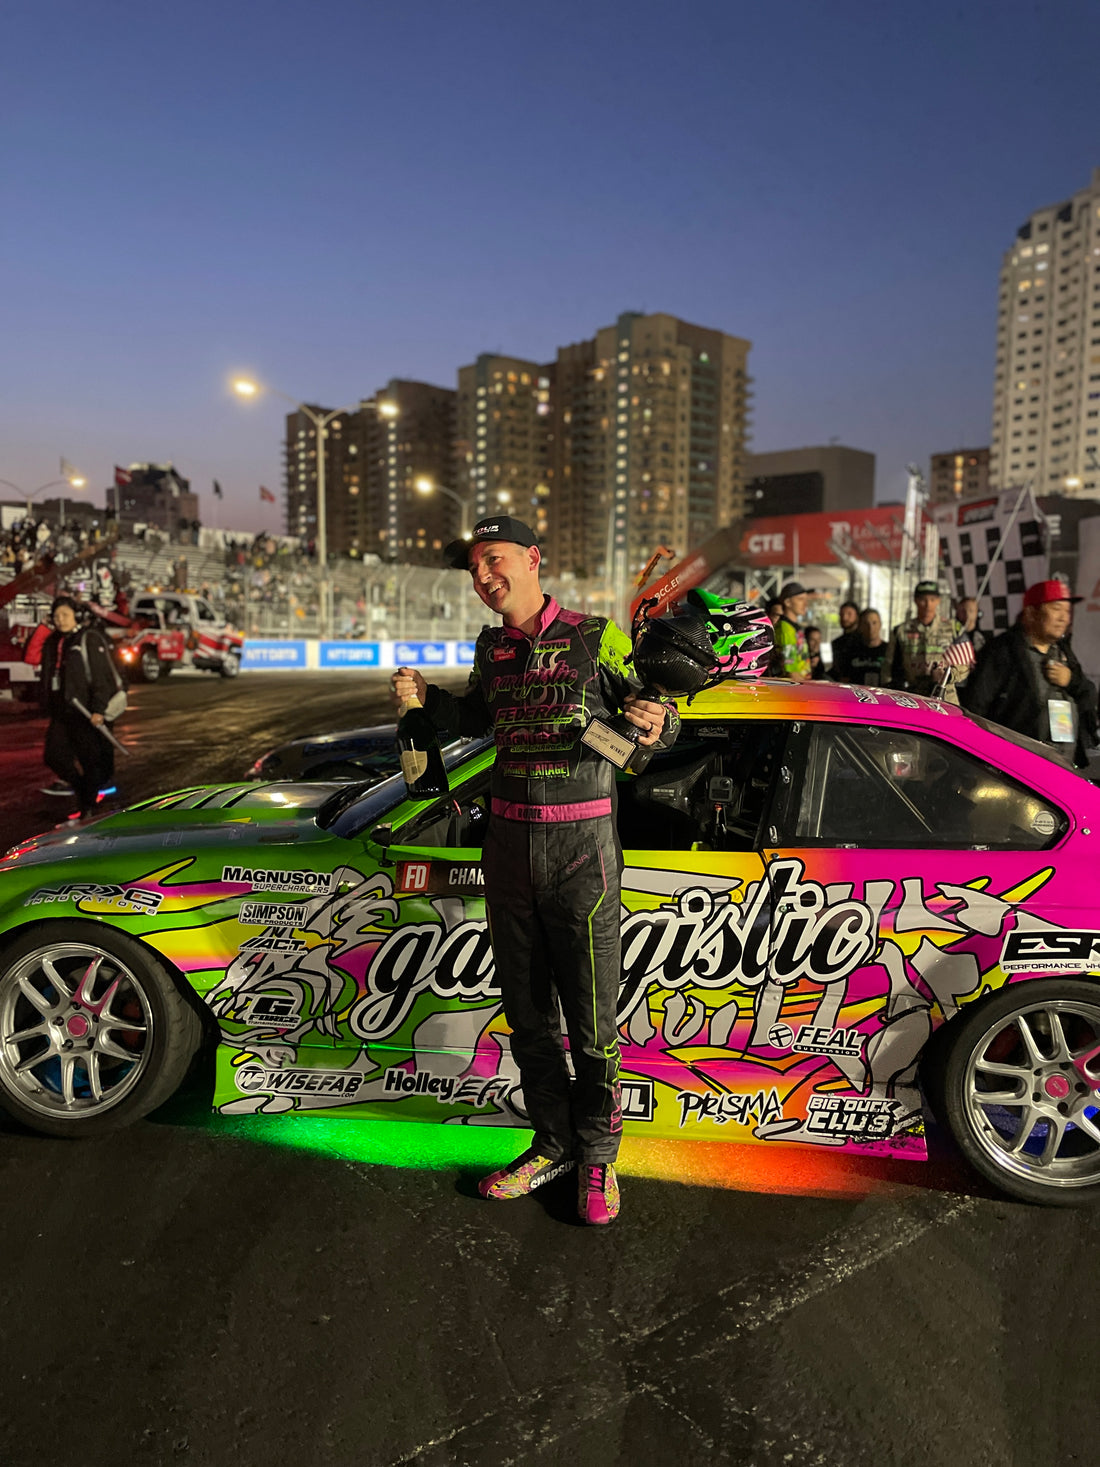 Charpentier claimed his first Super Drift victory at Long Beach this weekend